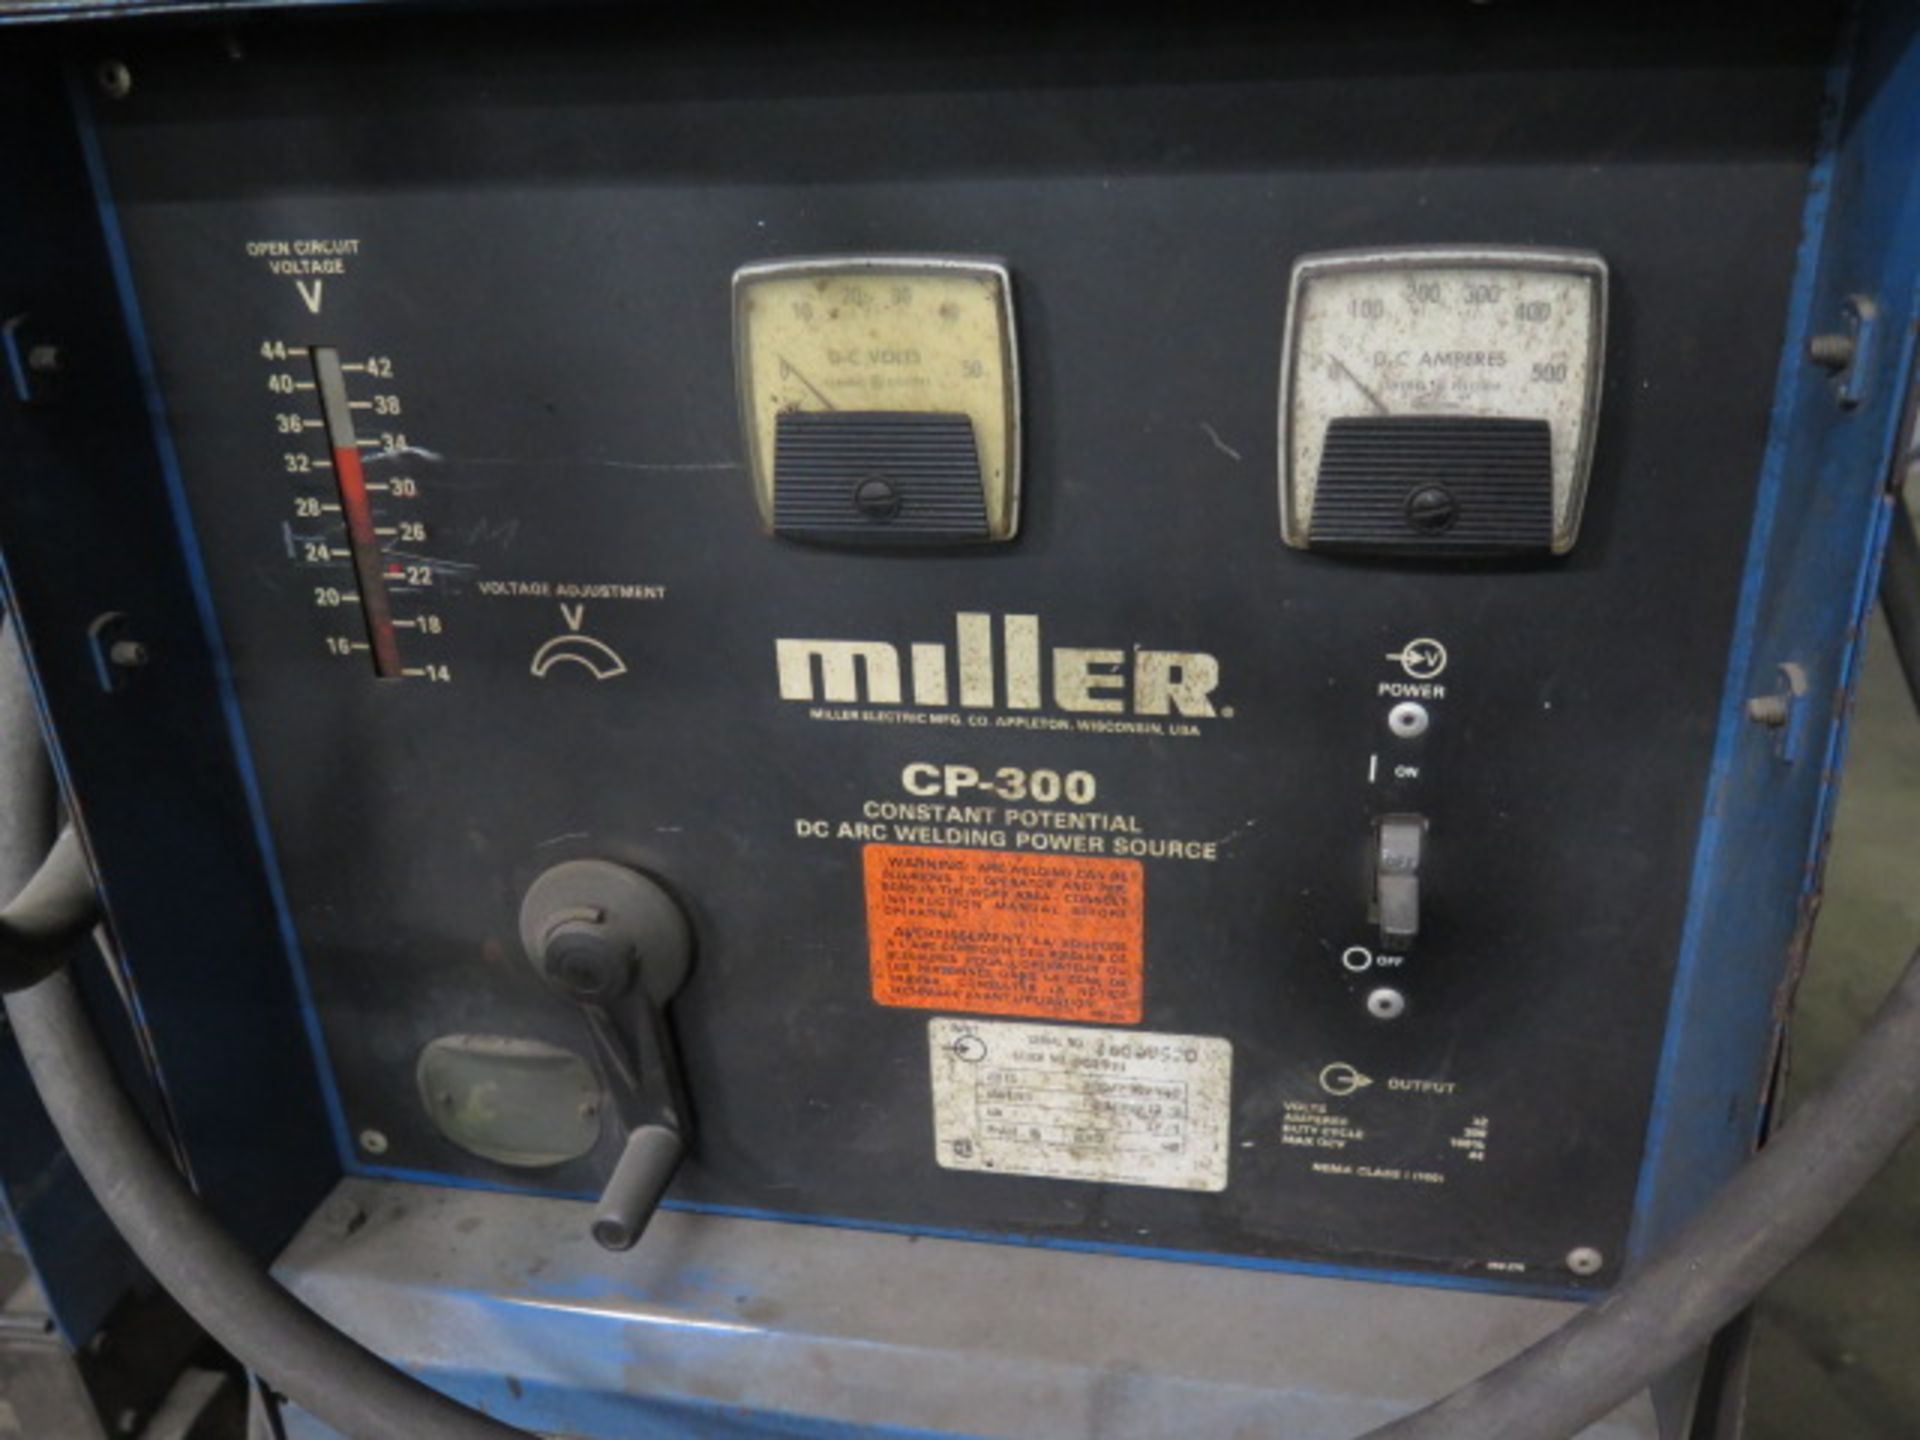 Miller CP-300 CP-DC Arc Welding Power Source s/ Miller S-52 Wire Feeder (SOLD AS-IS - NO WARRANTY) - Image 6 of 6